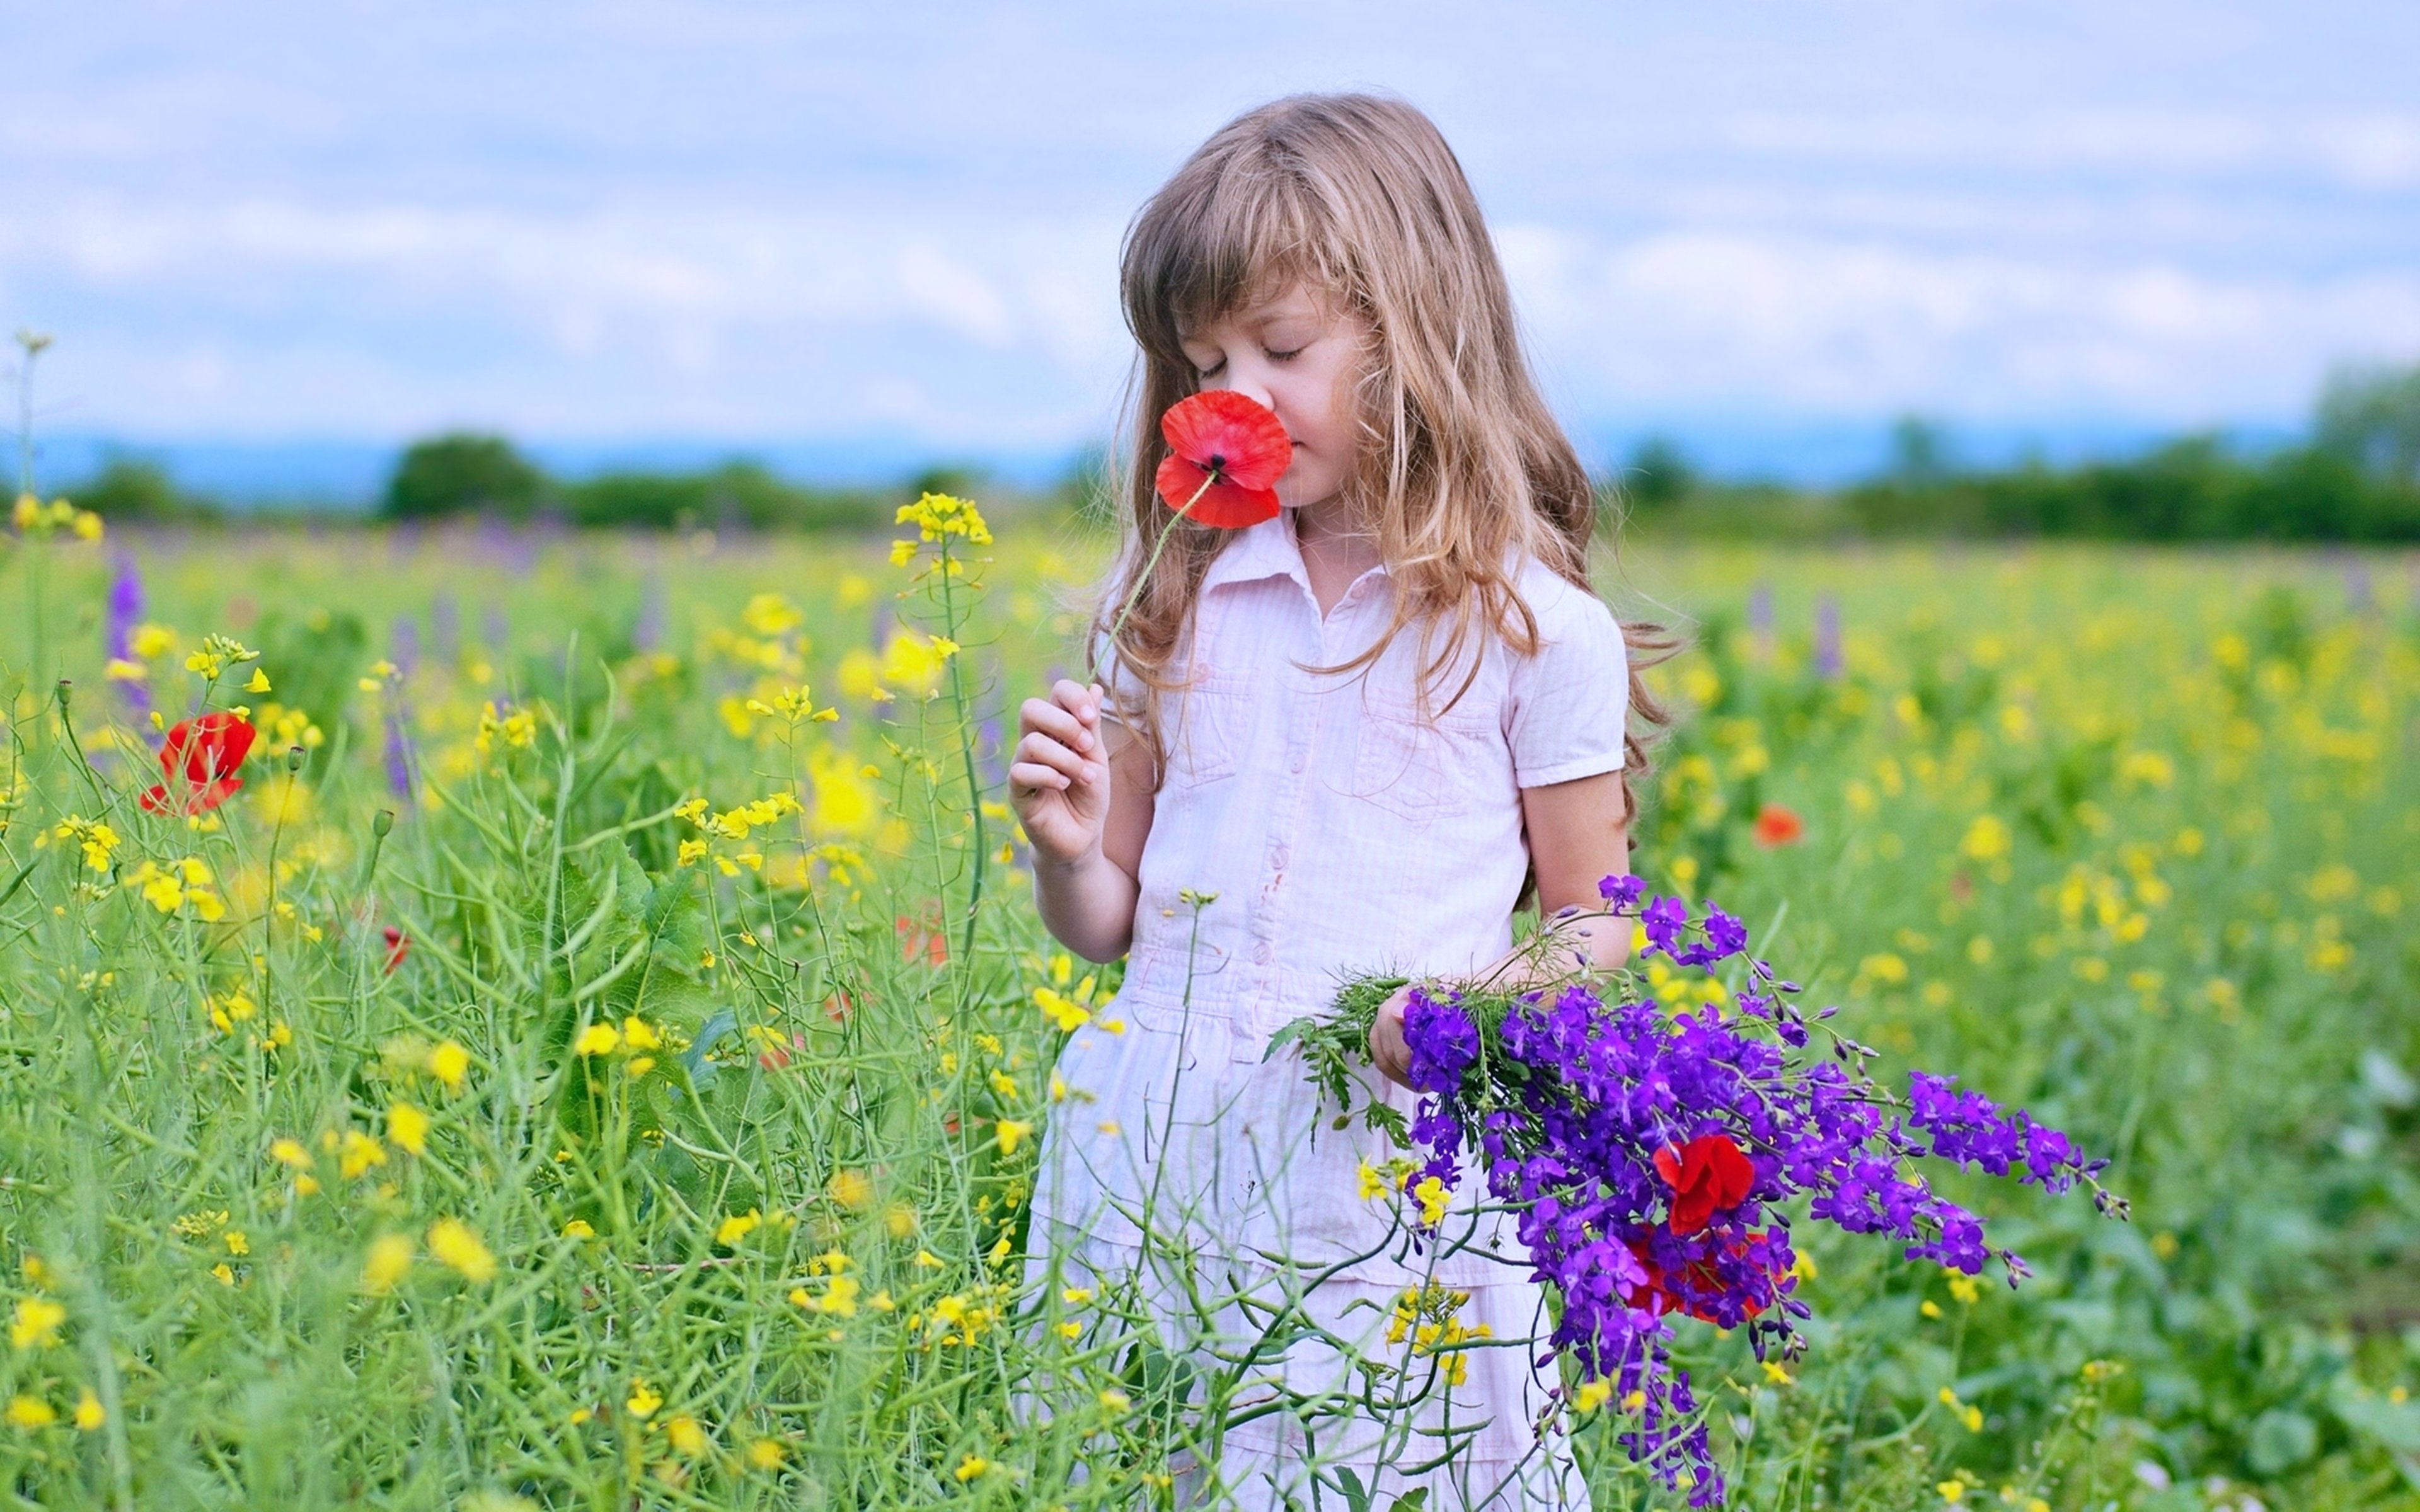 kids, Children, Nature, Landscapes, Flowers, Fields, Spring, Joy, Fun, Happy, Emotions, Earth, Countryside Wallpaper